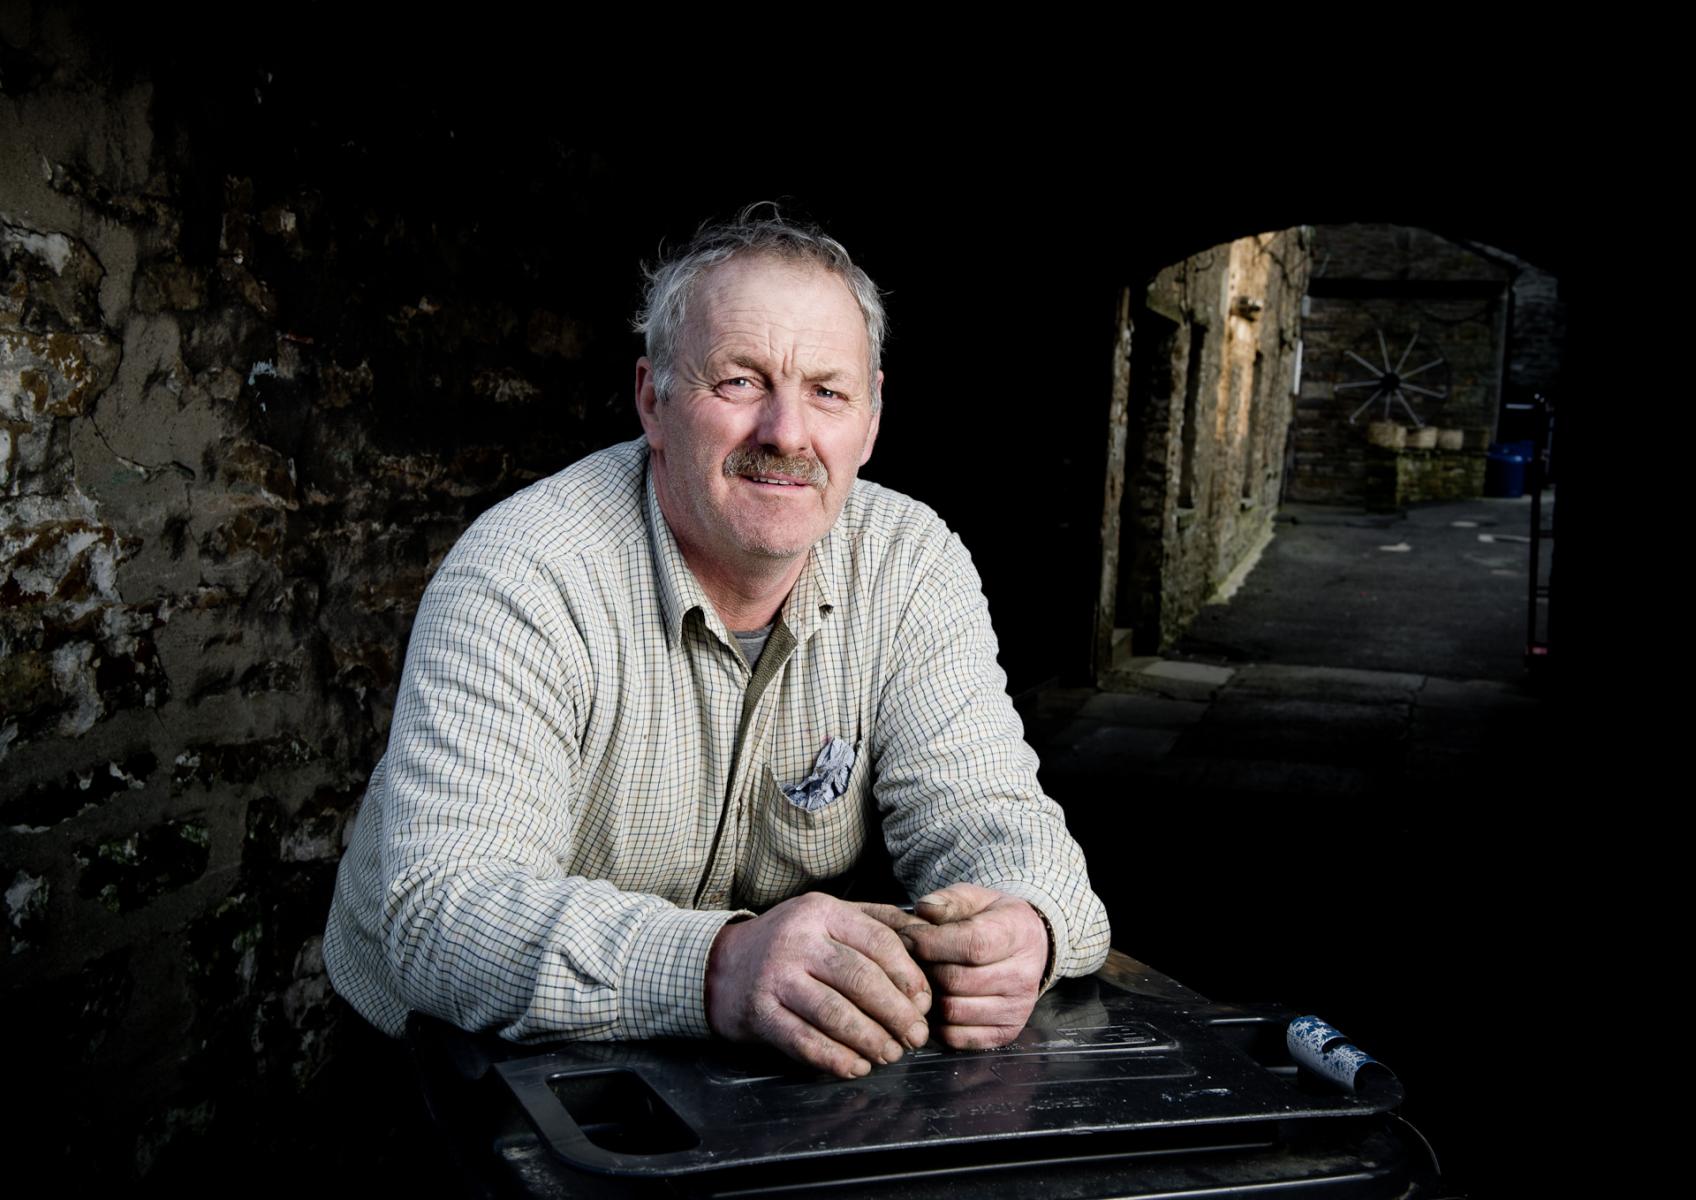 Alan Blades,  farmer and property owner